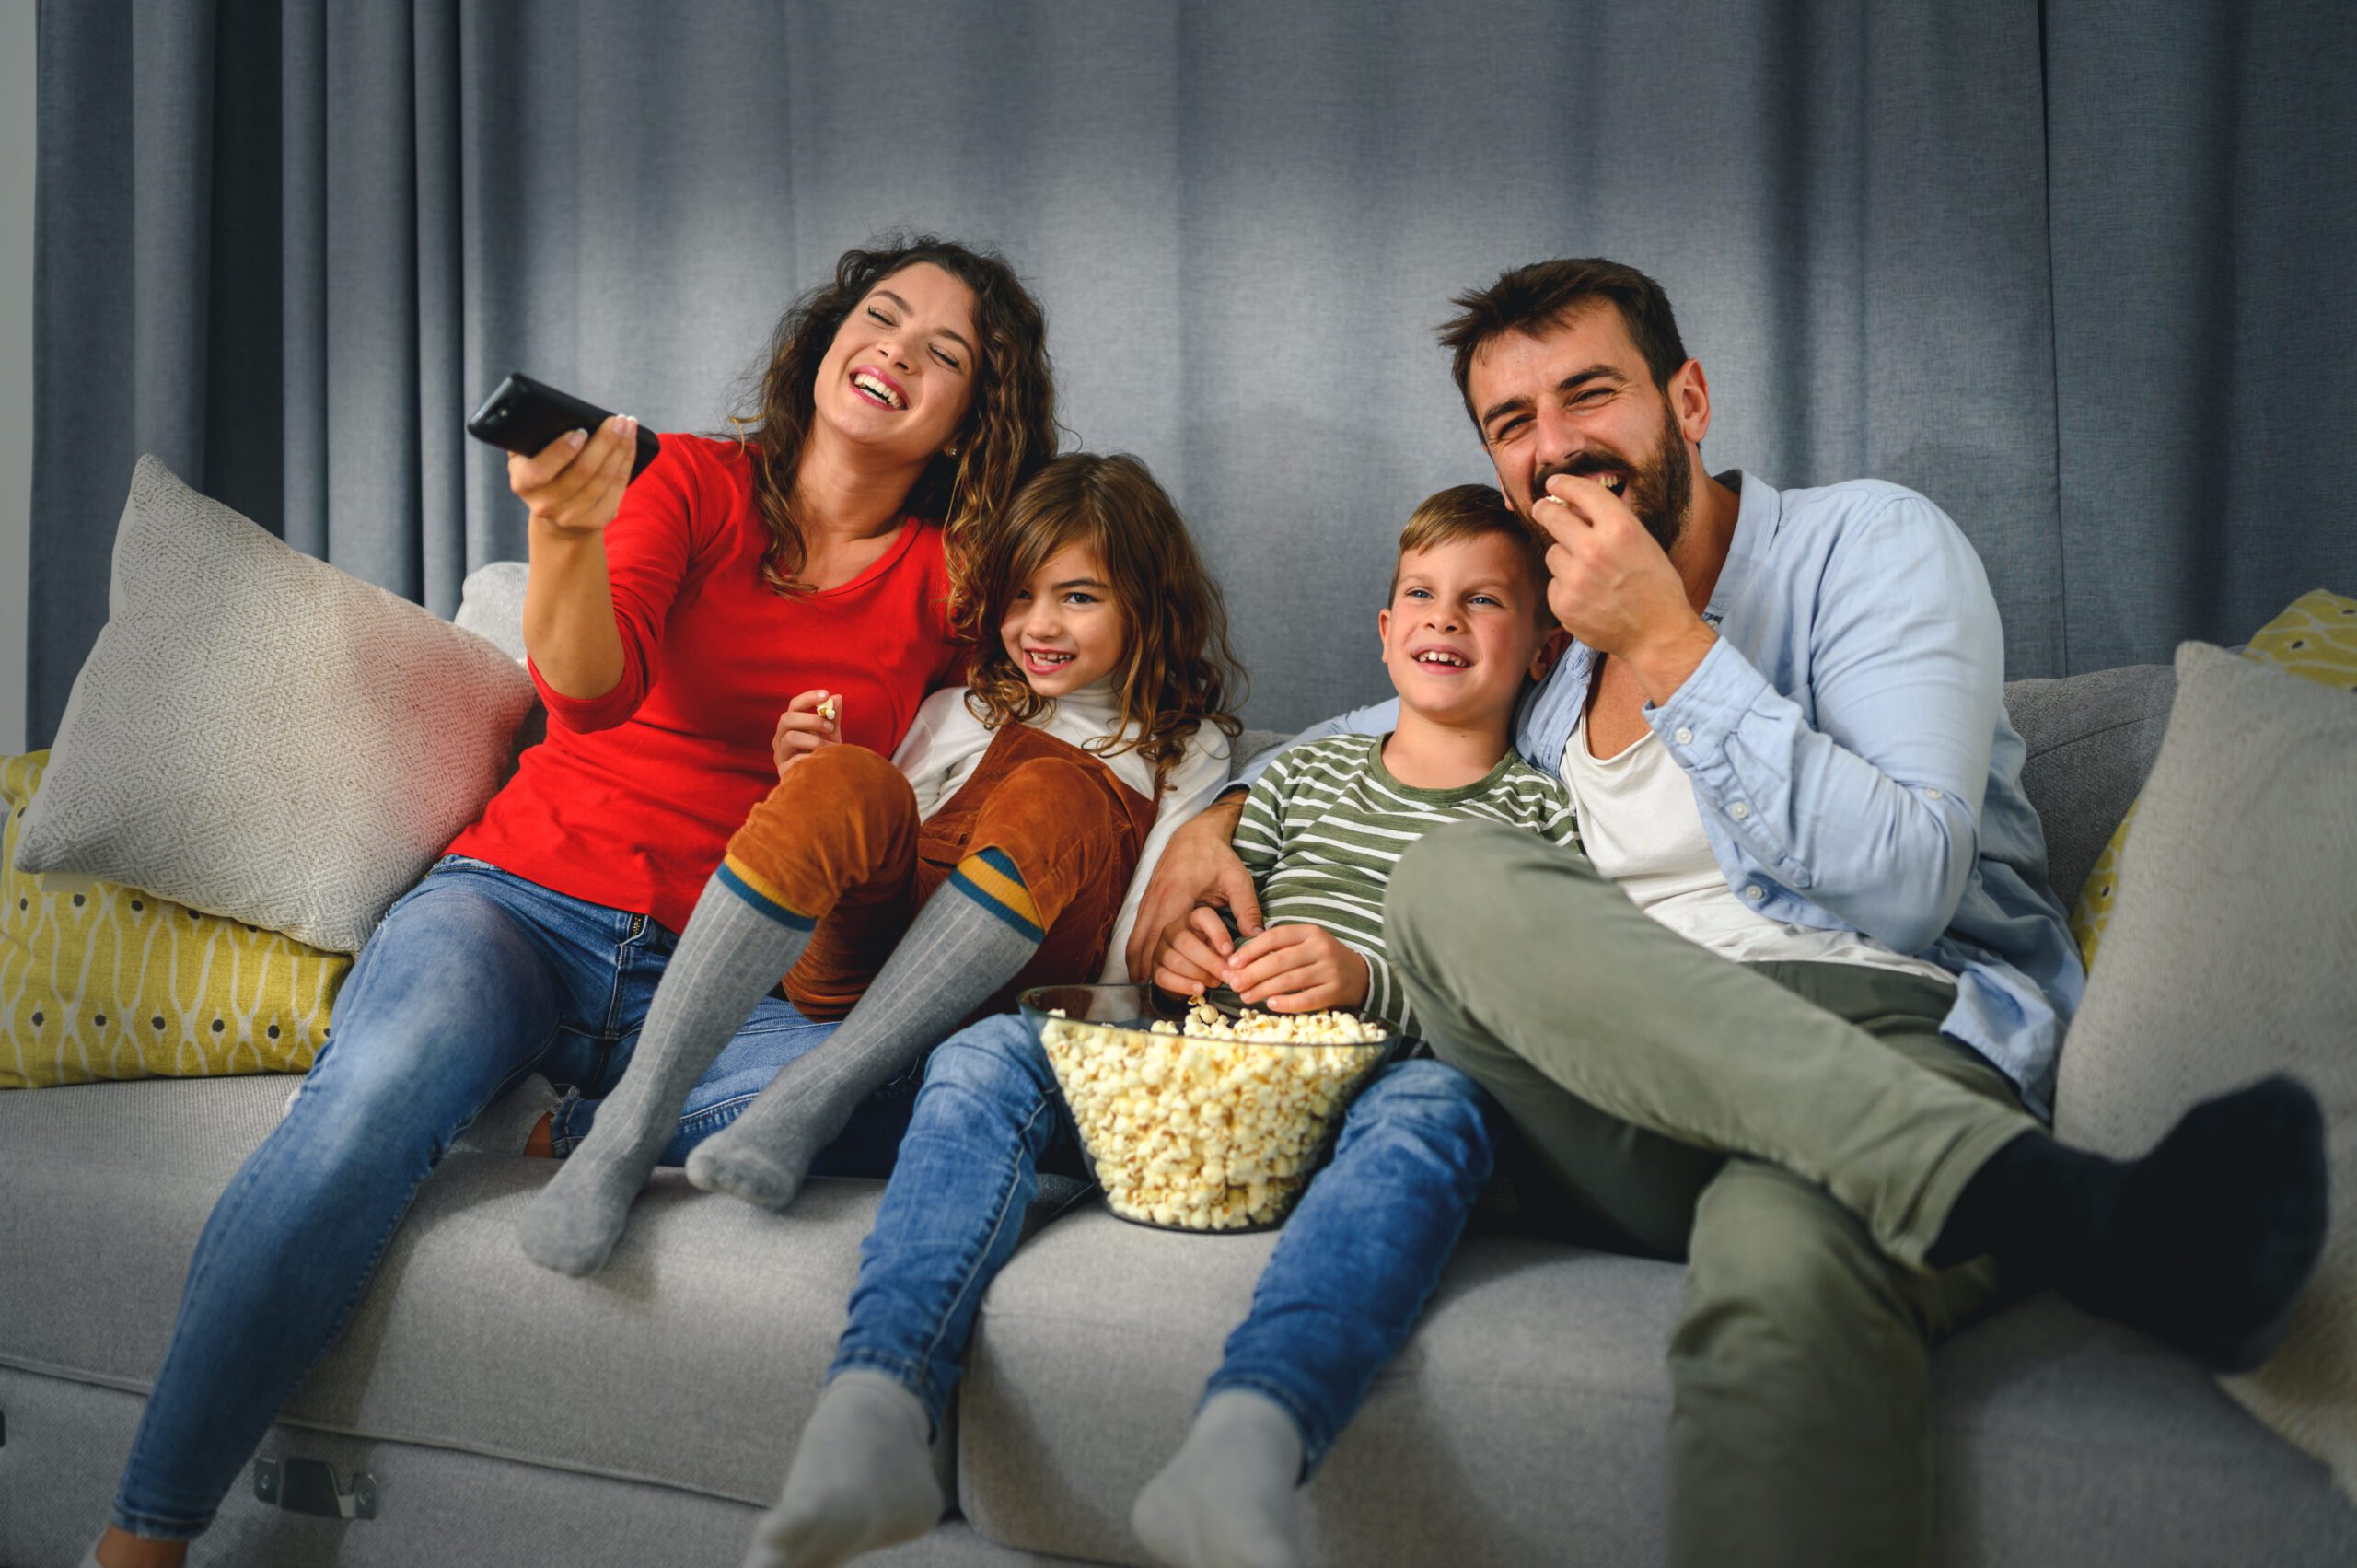 Internet speed for streaming tv and movies: how much do you need?